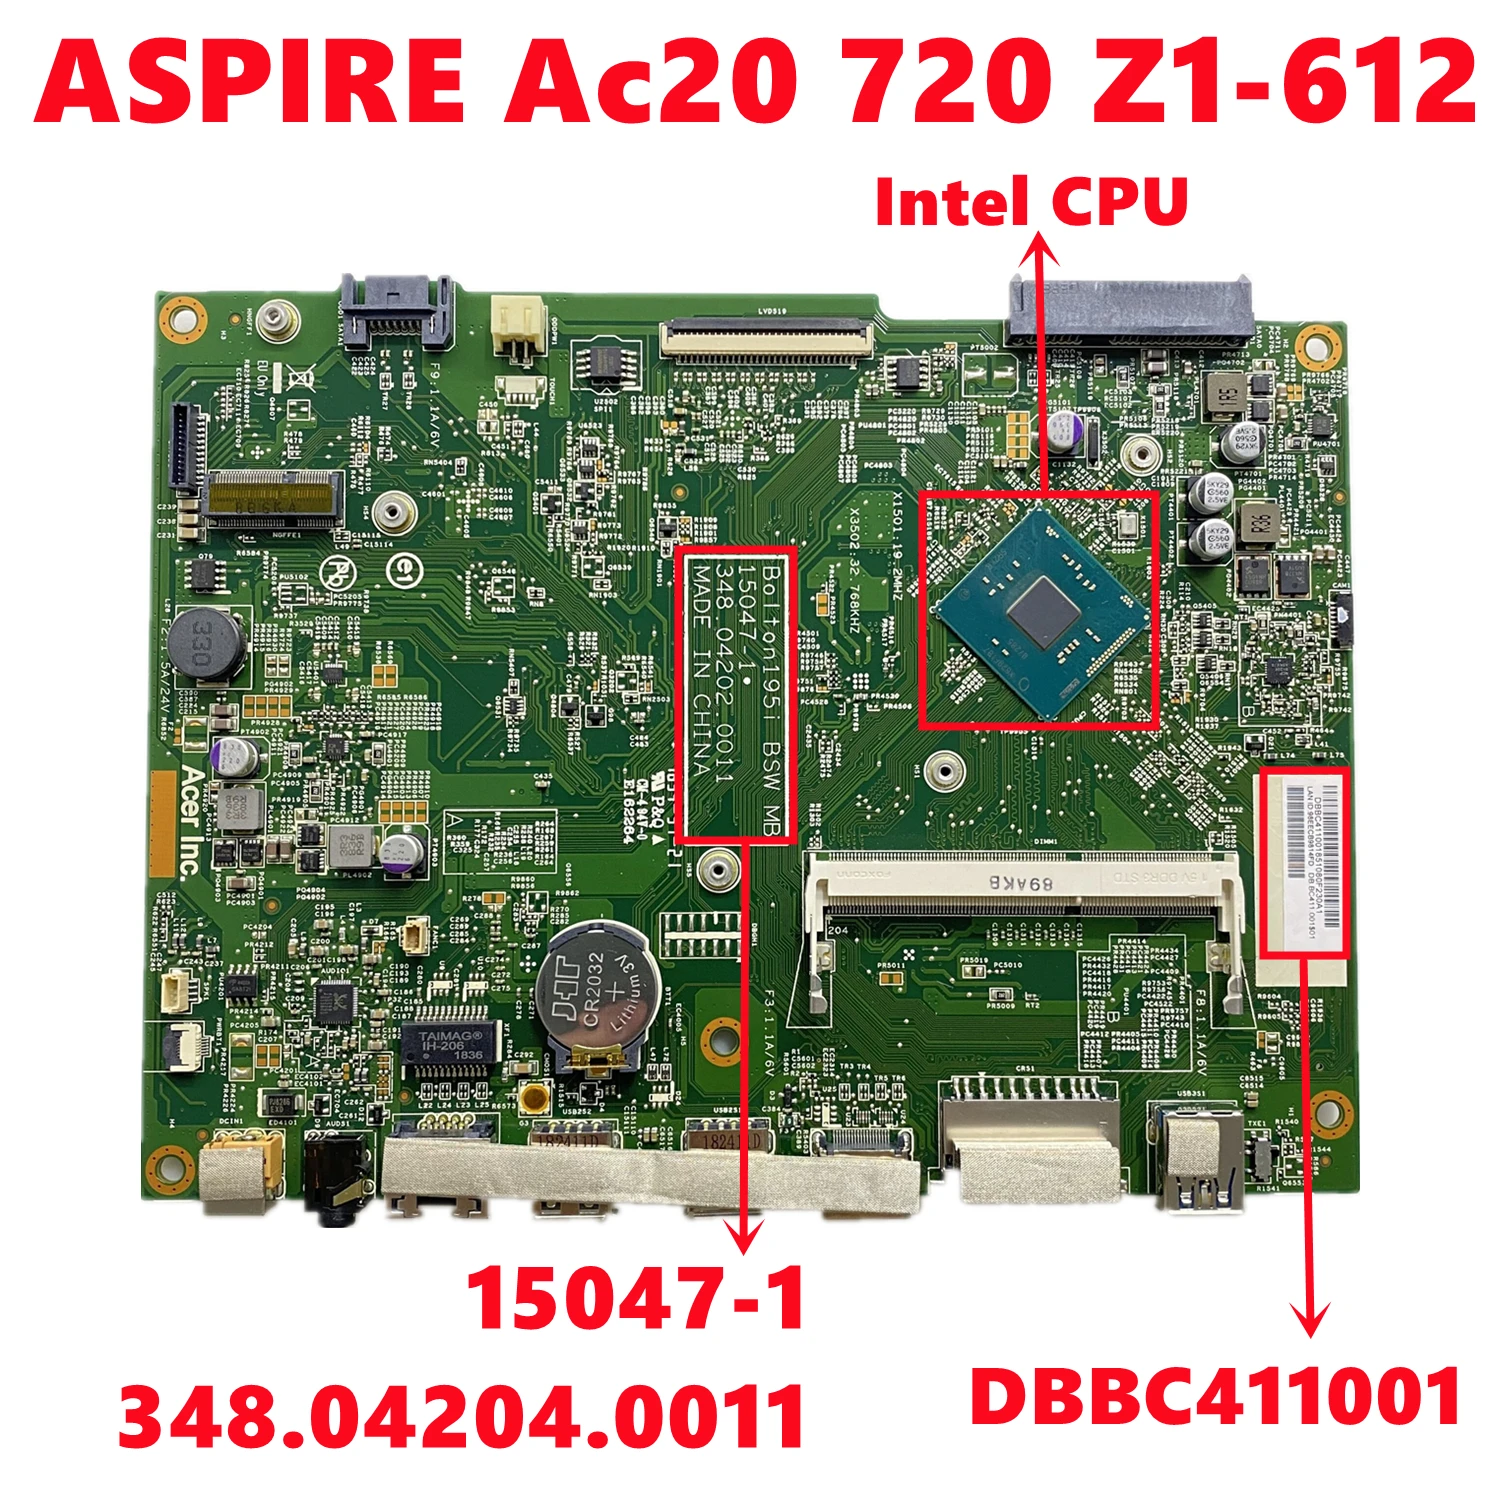 

DBBC411001 DBBC411001 For Acer ASPIRE Ac20 720 Z1-612 All-in-On Motherboard 15047-1 348.04204.0011 With Intel CPU DDR3 100% Test